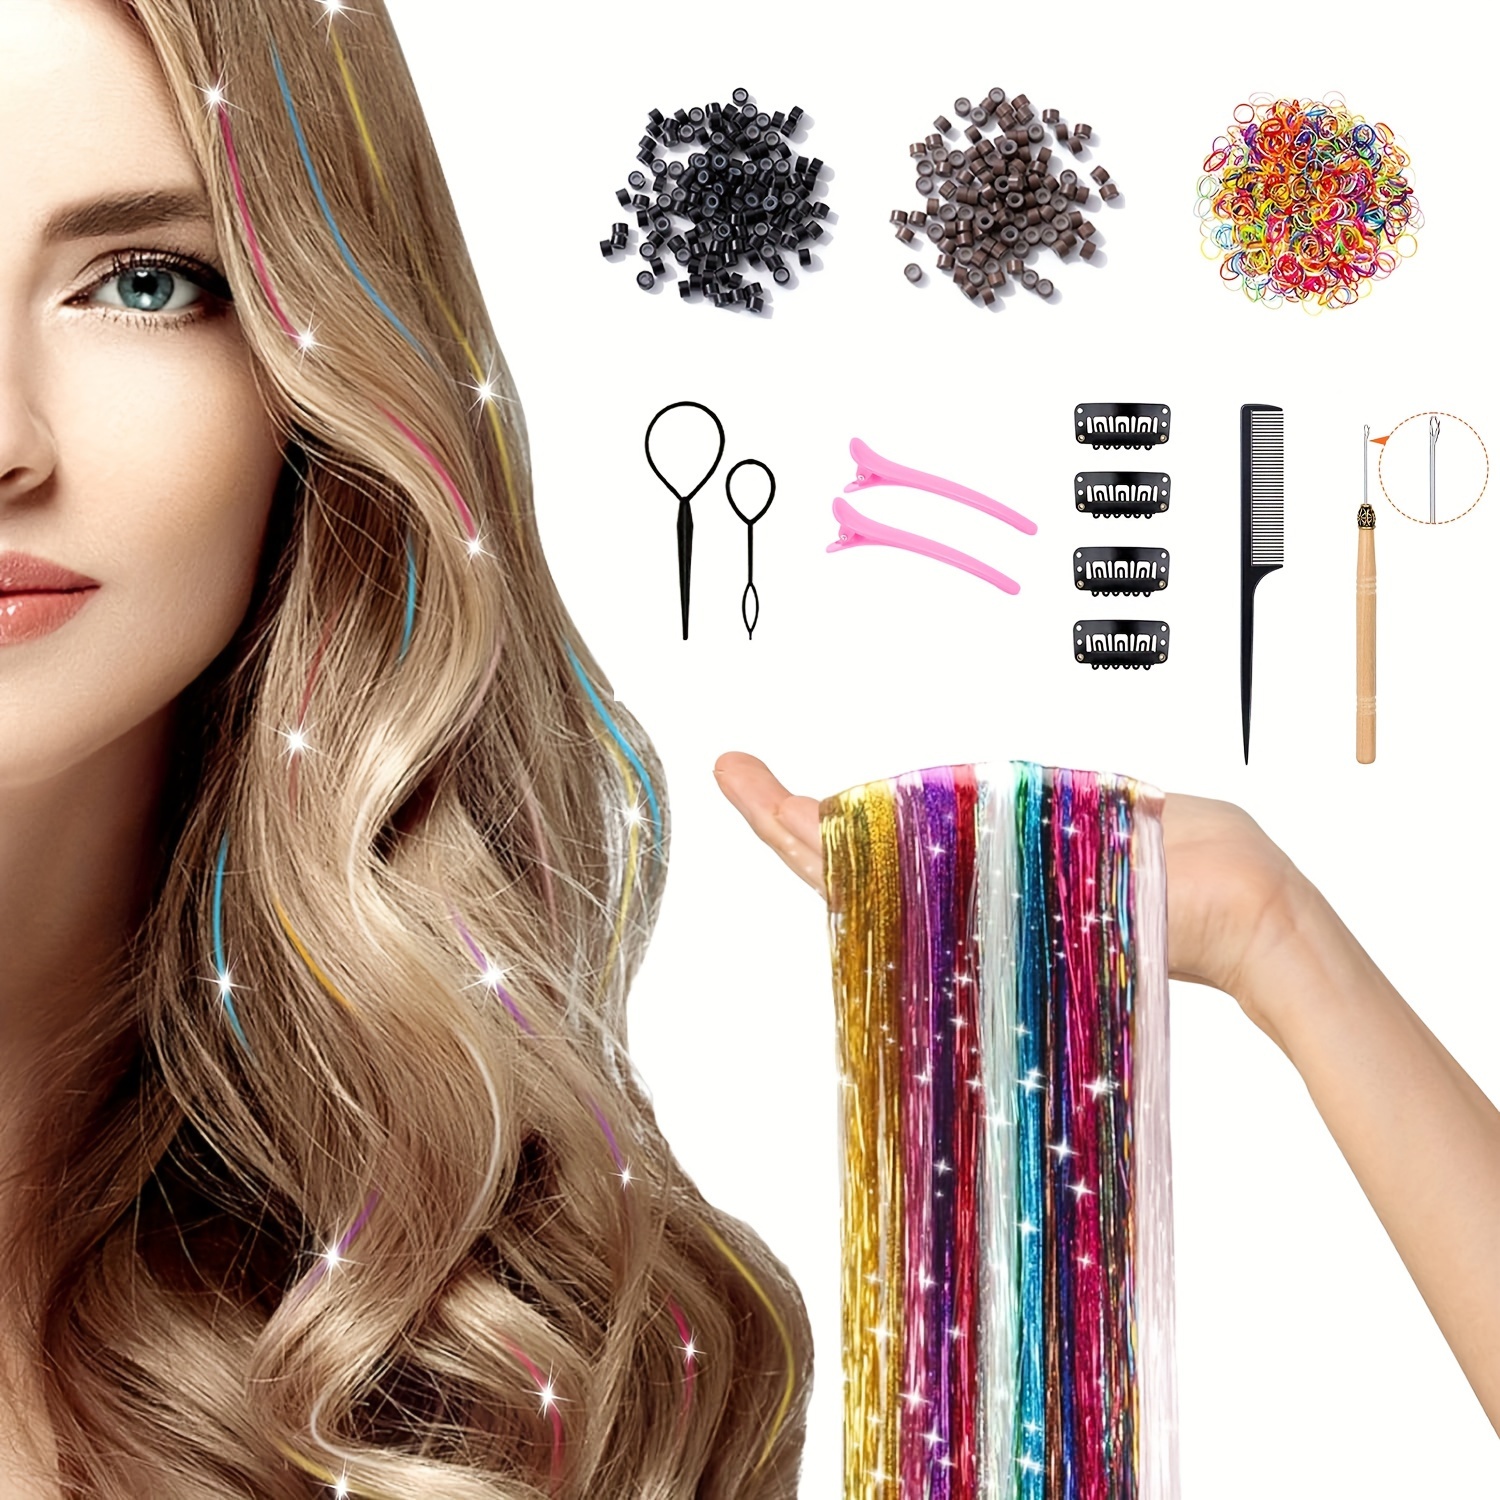 Rzvnmko Hair Tinsel,Hair Tinsel Kit with Tools,Tinsel Hair Extensions,12  Colors 2400 Strands Fairy Hair Tinsel Heat Resistant 47 Inch Hair Glitter